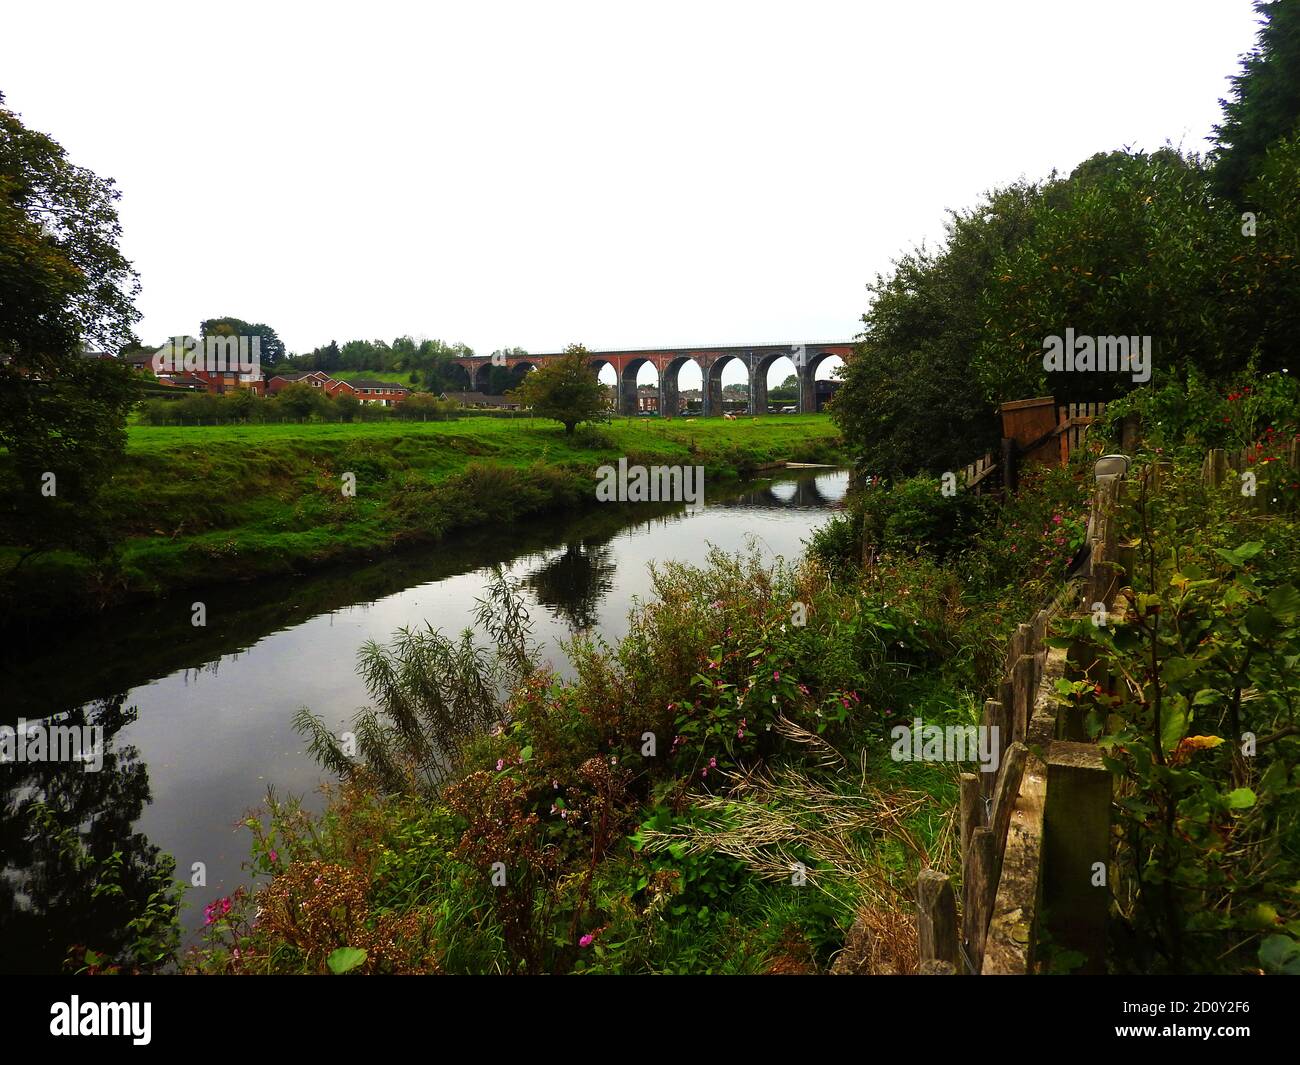 Sept 2000 - The brick built viaduct at Whalley, (known locally as Whalley Arches), Lancashire and the River Calder, England from the grounds of Whalley Abbey . The 48-span railway bridge was built between 1846 and 1850 under the supervision of engineer Terence Wolfe Flanagan and formed part of the Bolton, Blackburn, Clitheroe and West Yorkshire Railway. Over seven million bricks and 12,338 cubic metres of stone were used in its  construction.  In 1849, two of the 41 arches  collapsed. three of those constructing the bridge lost their lives. Stock Photo